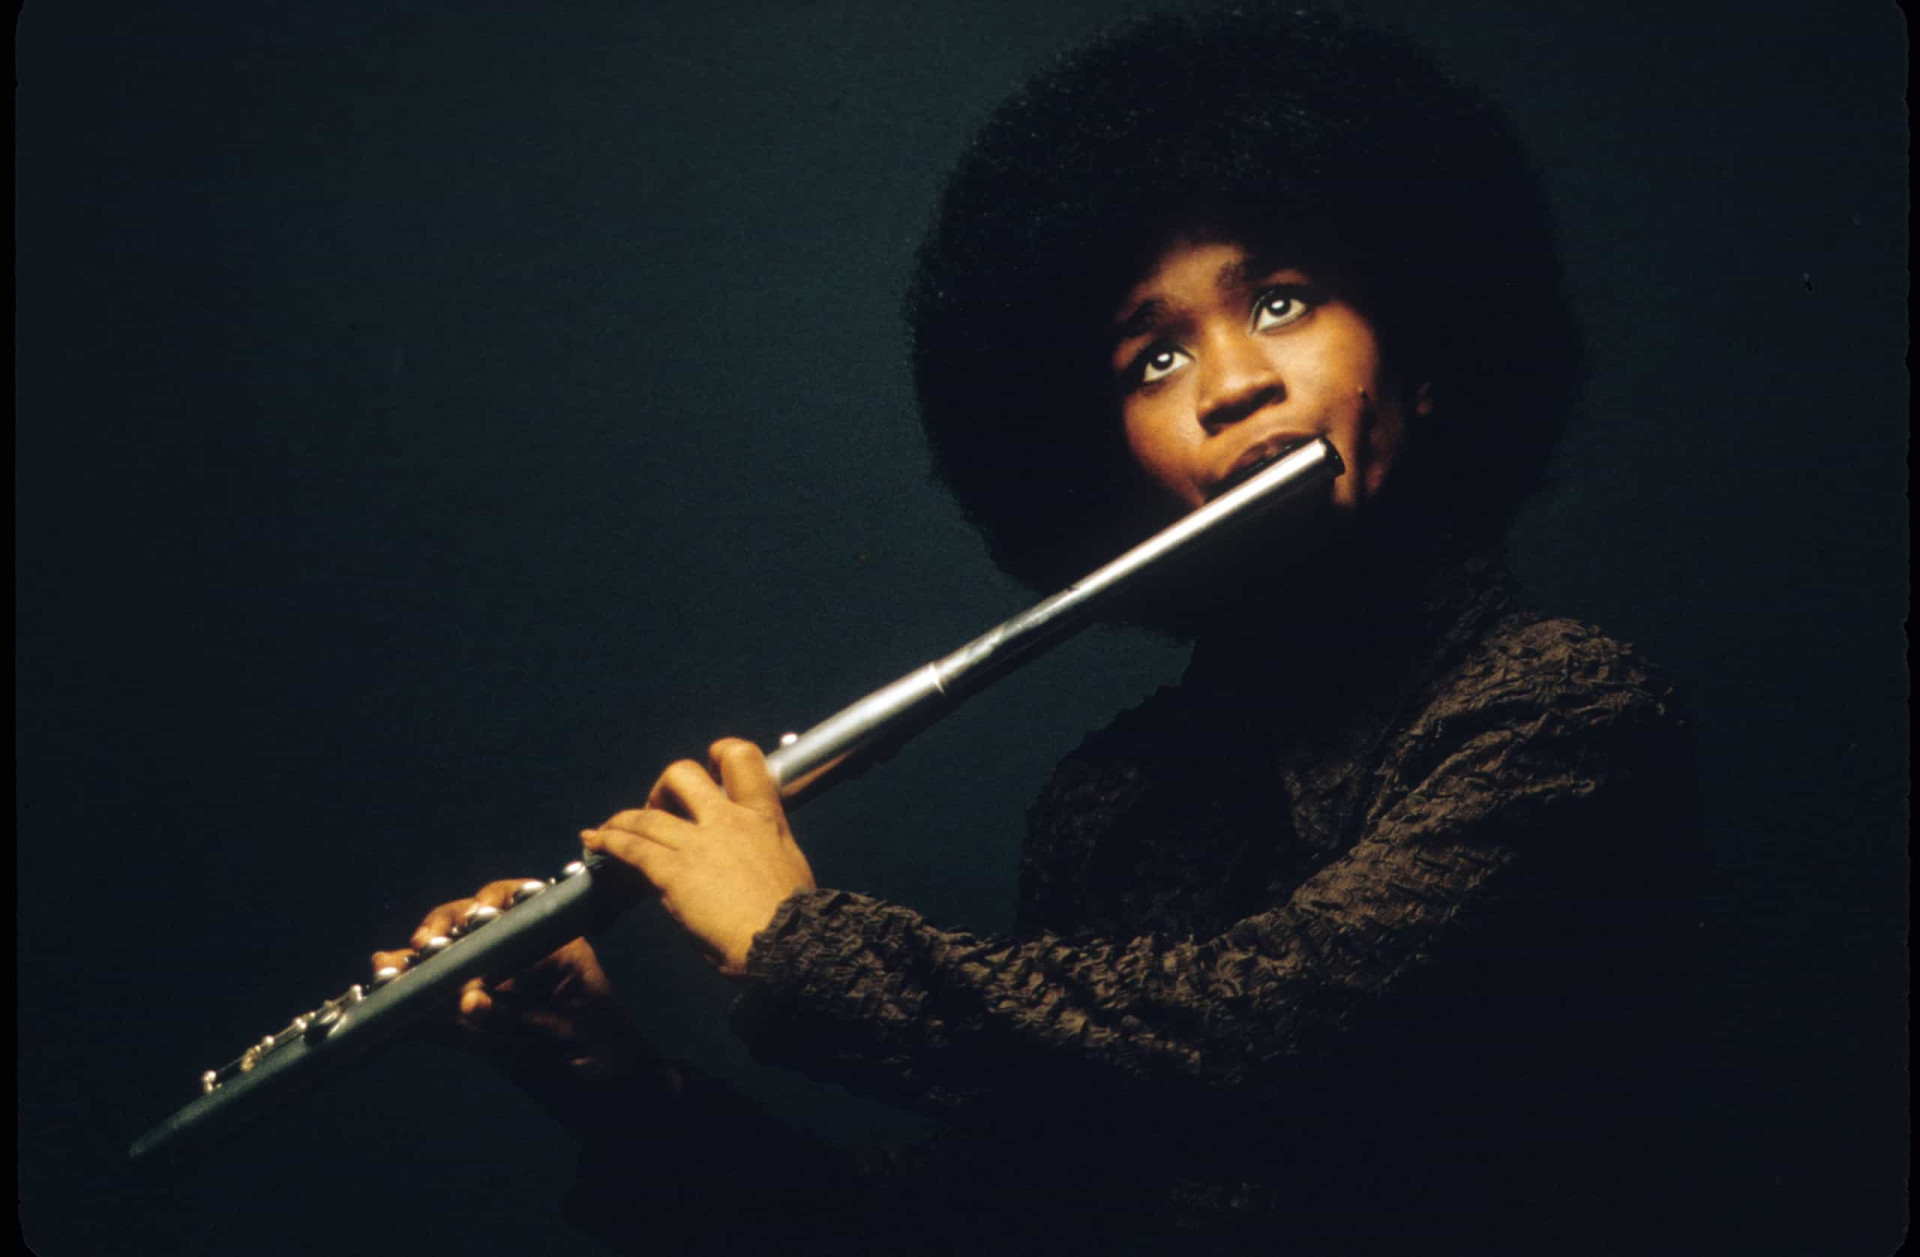 <p>The "First Lady of Flute," Bobbi Humphrey was also the first woman to be signed as a solo artist to the prestigious Blue Note Records label.</p><p>You may also like:<a href="https://www.starsinsider.com/n/483396?utm_source=msn.com&utm_medium=display&utm_campaign=referral_description&utm_content=507986v1en-sg"> Everyday things you didn’t know were invented by indigenous peoples</a></p>